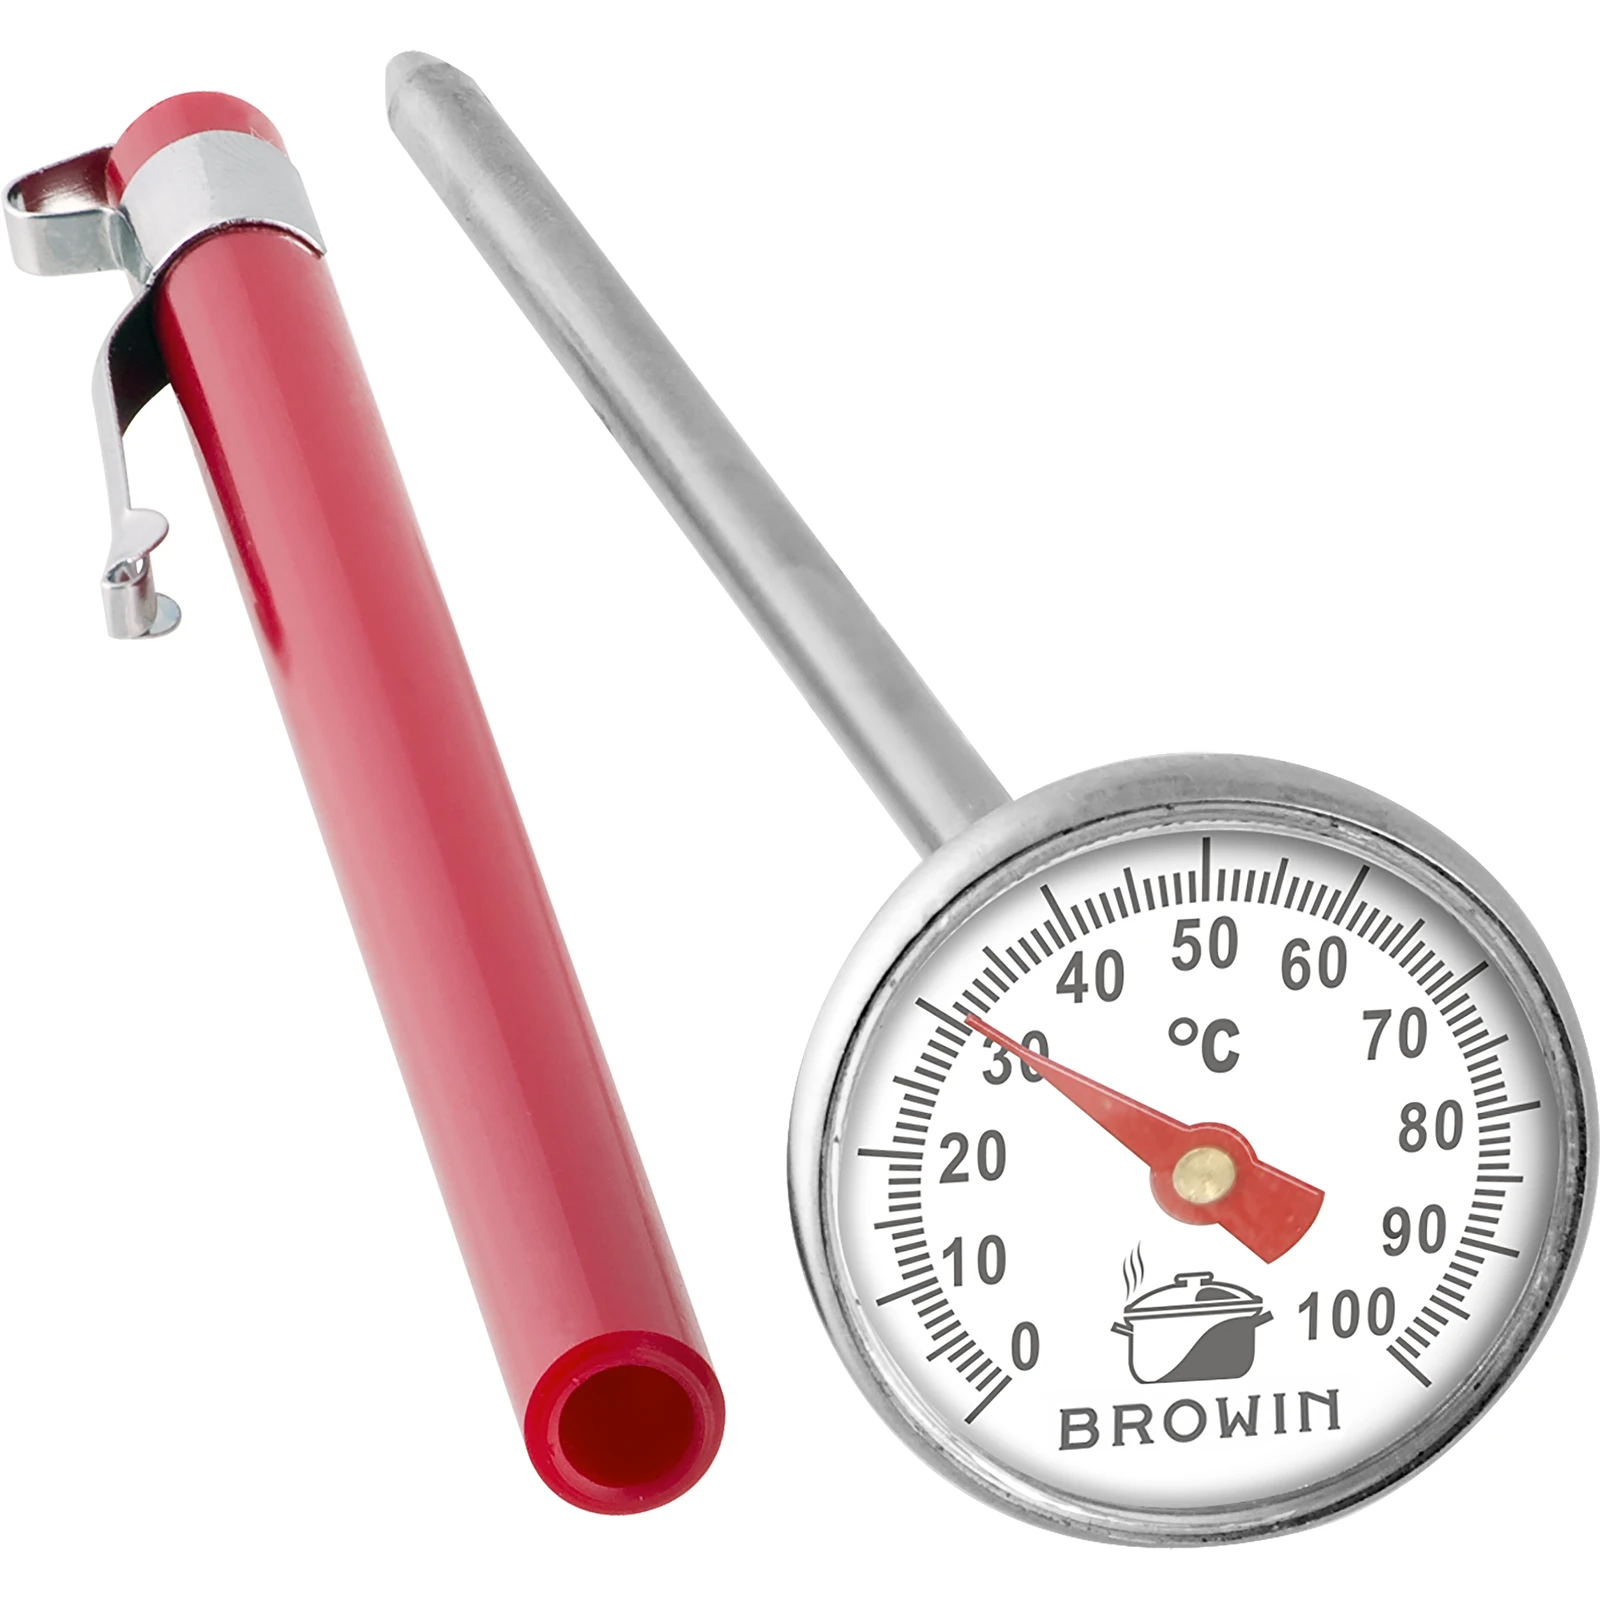 https://browin.com/static/images/1600/kitchen-thermometer-for-cooking-and-roasting-0-c-100-c-100100.webp